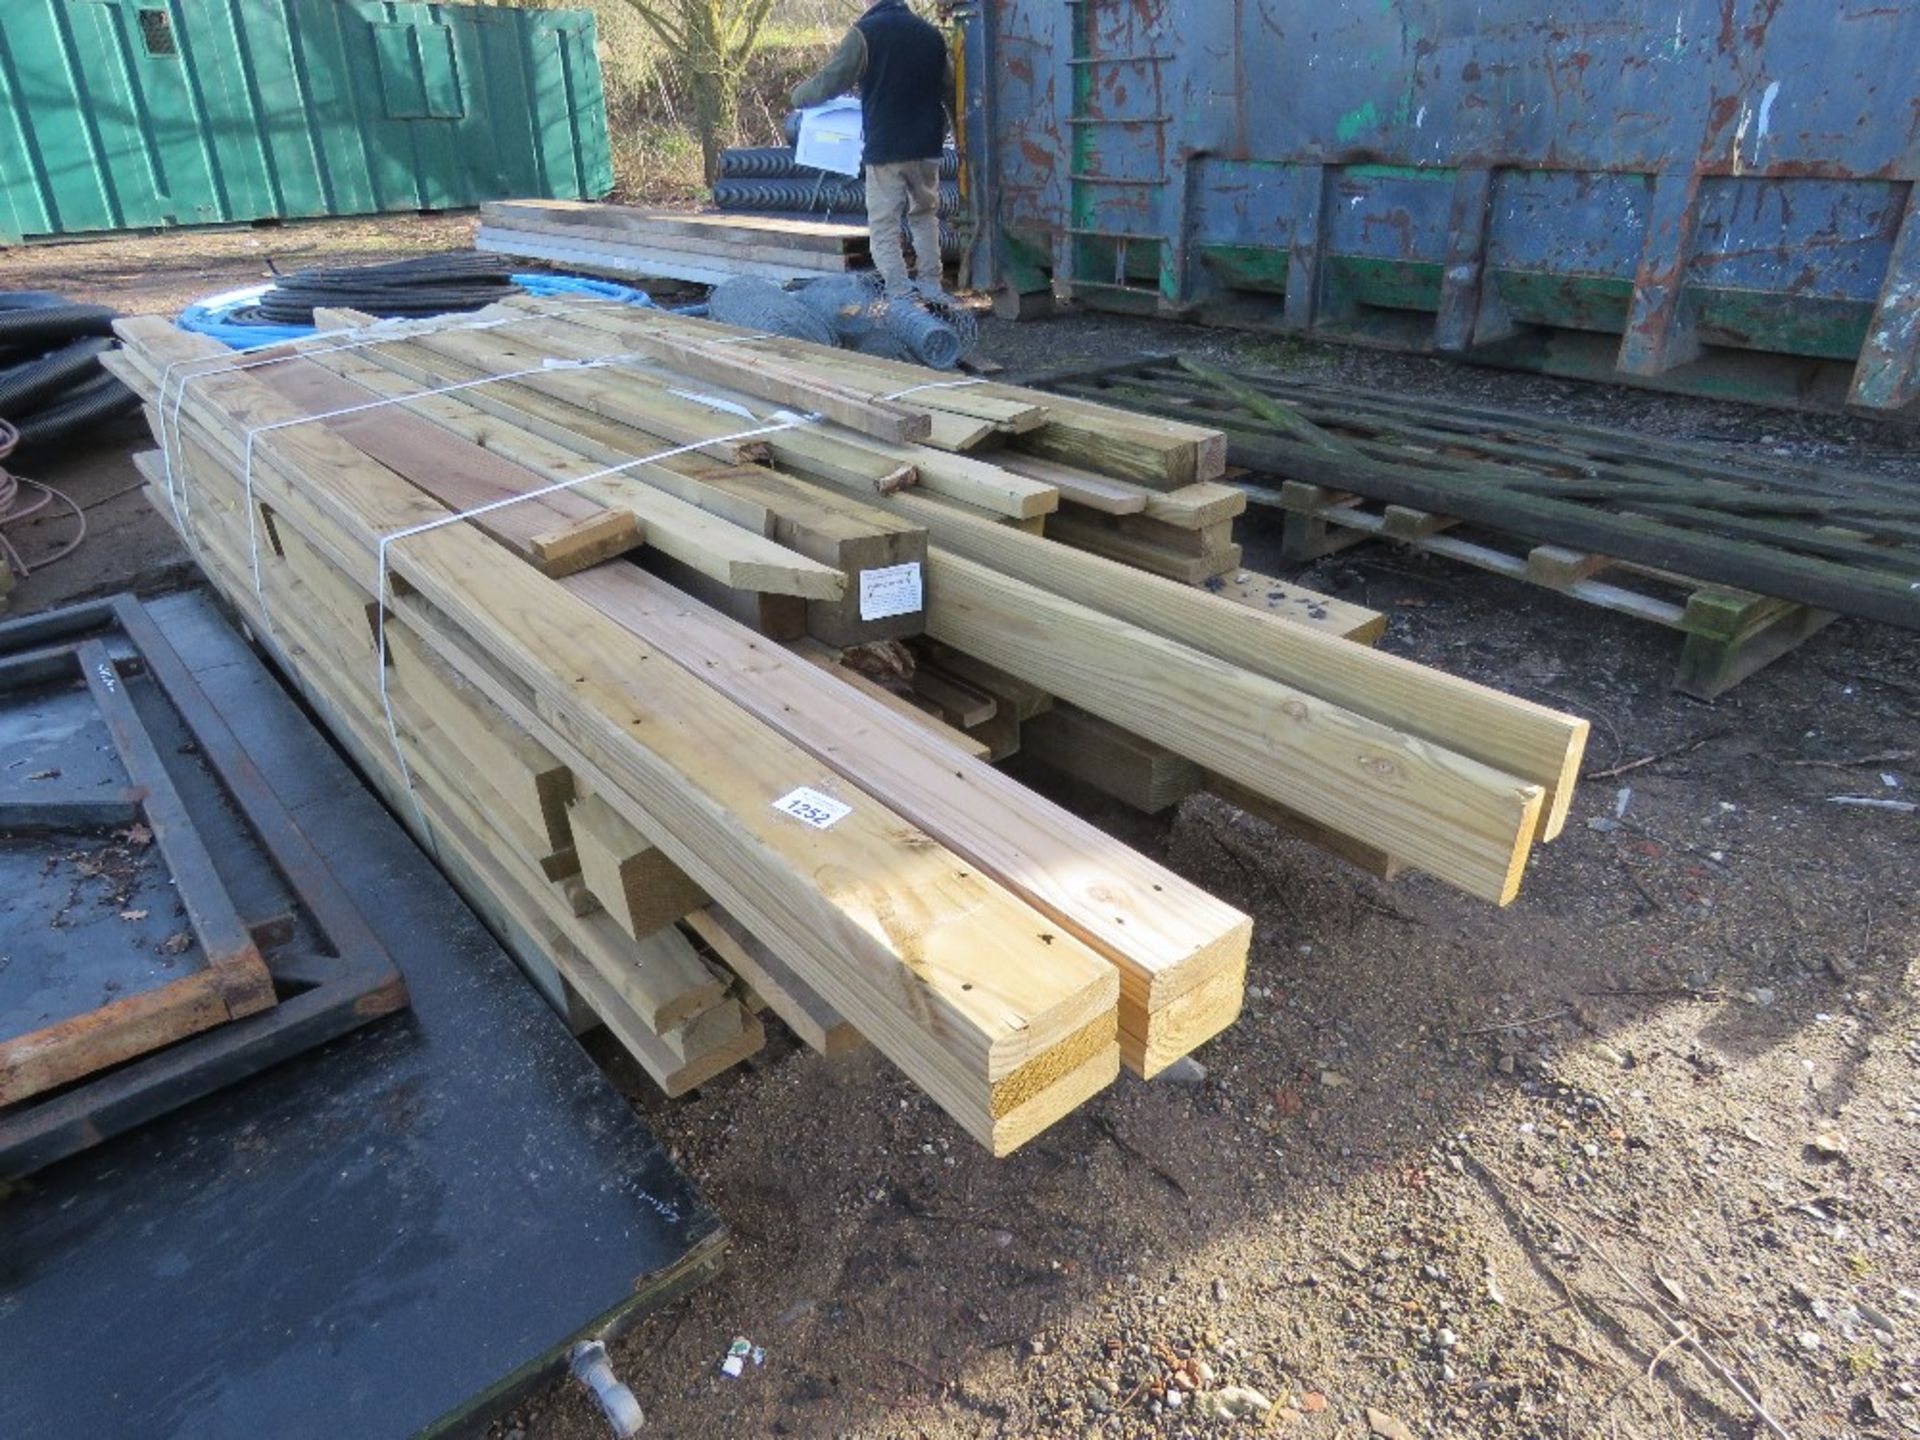 LARGE QUANTITY OF ASSORTED FENCING AND CONSTRUCTION TIMBERS.